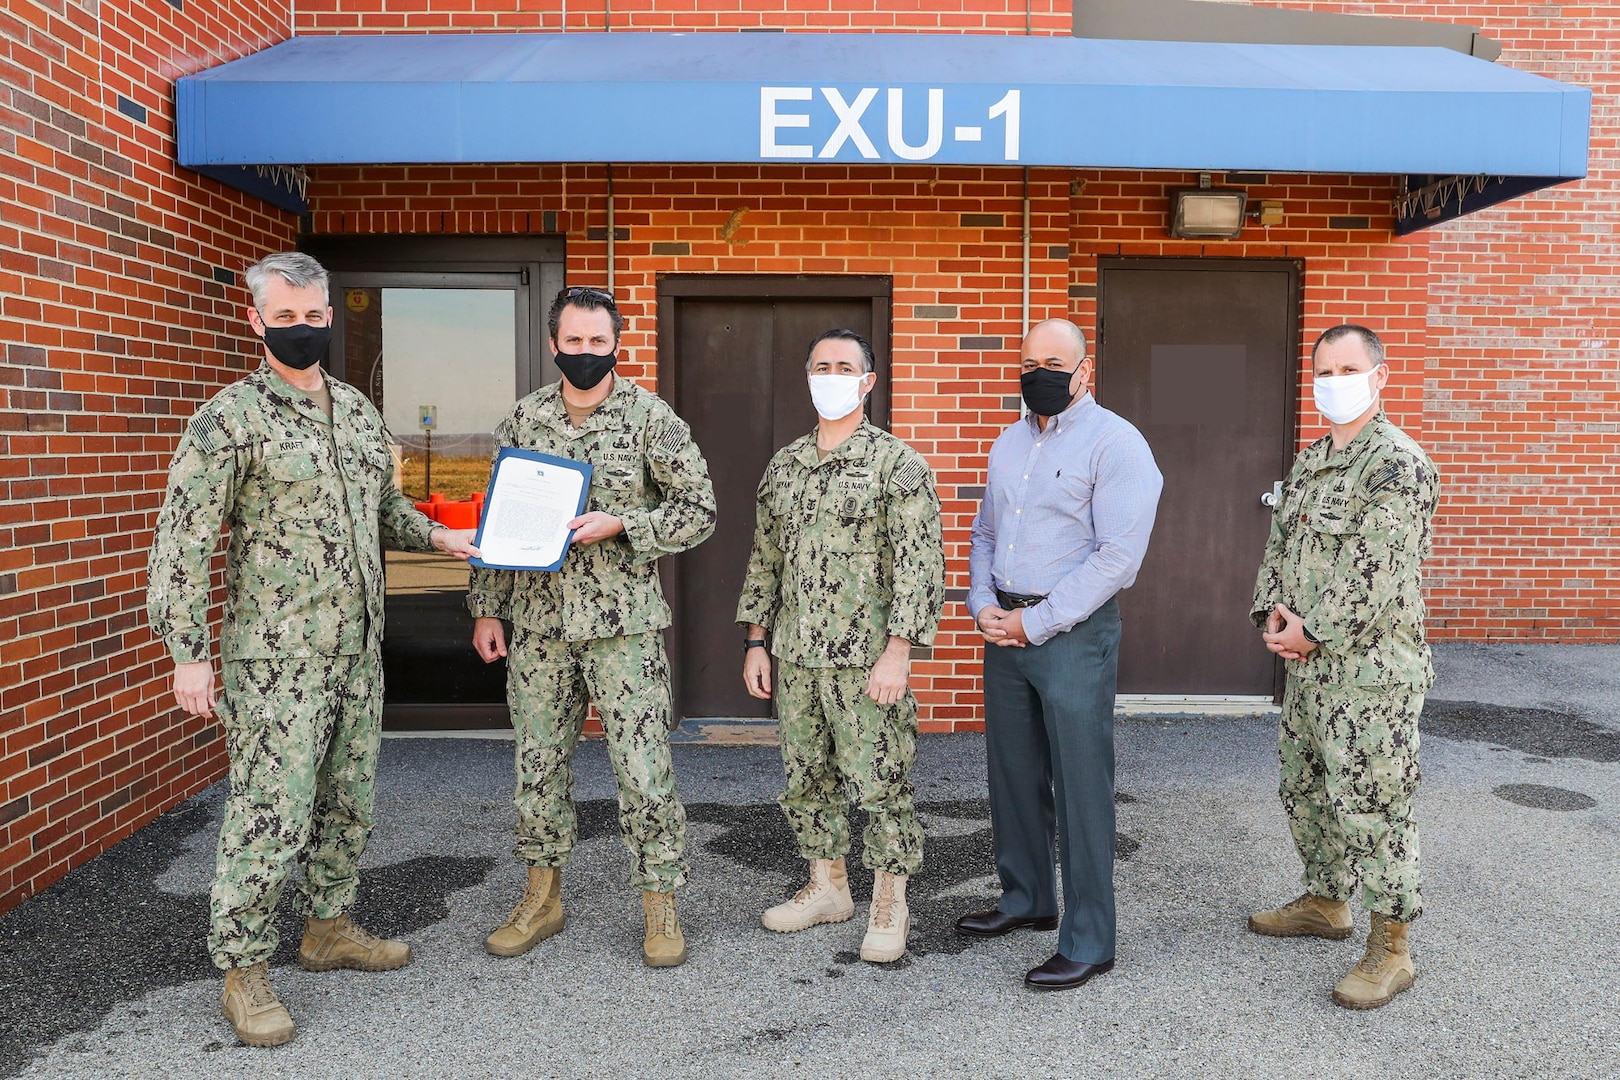 NSWC Indian Head Division Commanding Officer Capt. Scott Kraft presents EXU-1 Commanding Officer Cmdr. Edgar Britt with the Navy Unit Commendation, Dec. 15, at EXU-1’s headquarters aboard Naval Support Facility Indian Head. Also pictured are Command Master Chief Jose Bryant (center), EXU-1’s Civilian Director Alan Tompkins (center-right), and EXU-1’s Executive Officer Lt. Cmdr. Jon Maurus (right). (U.S. Navy photo by Matt Poynor)